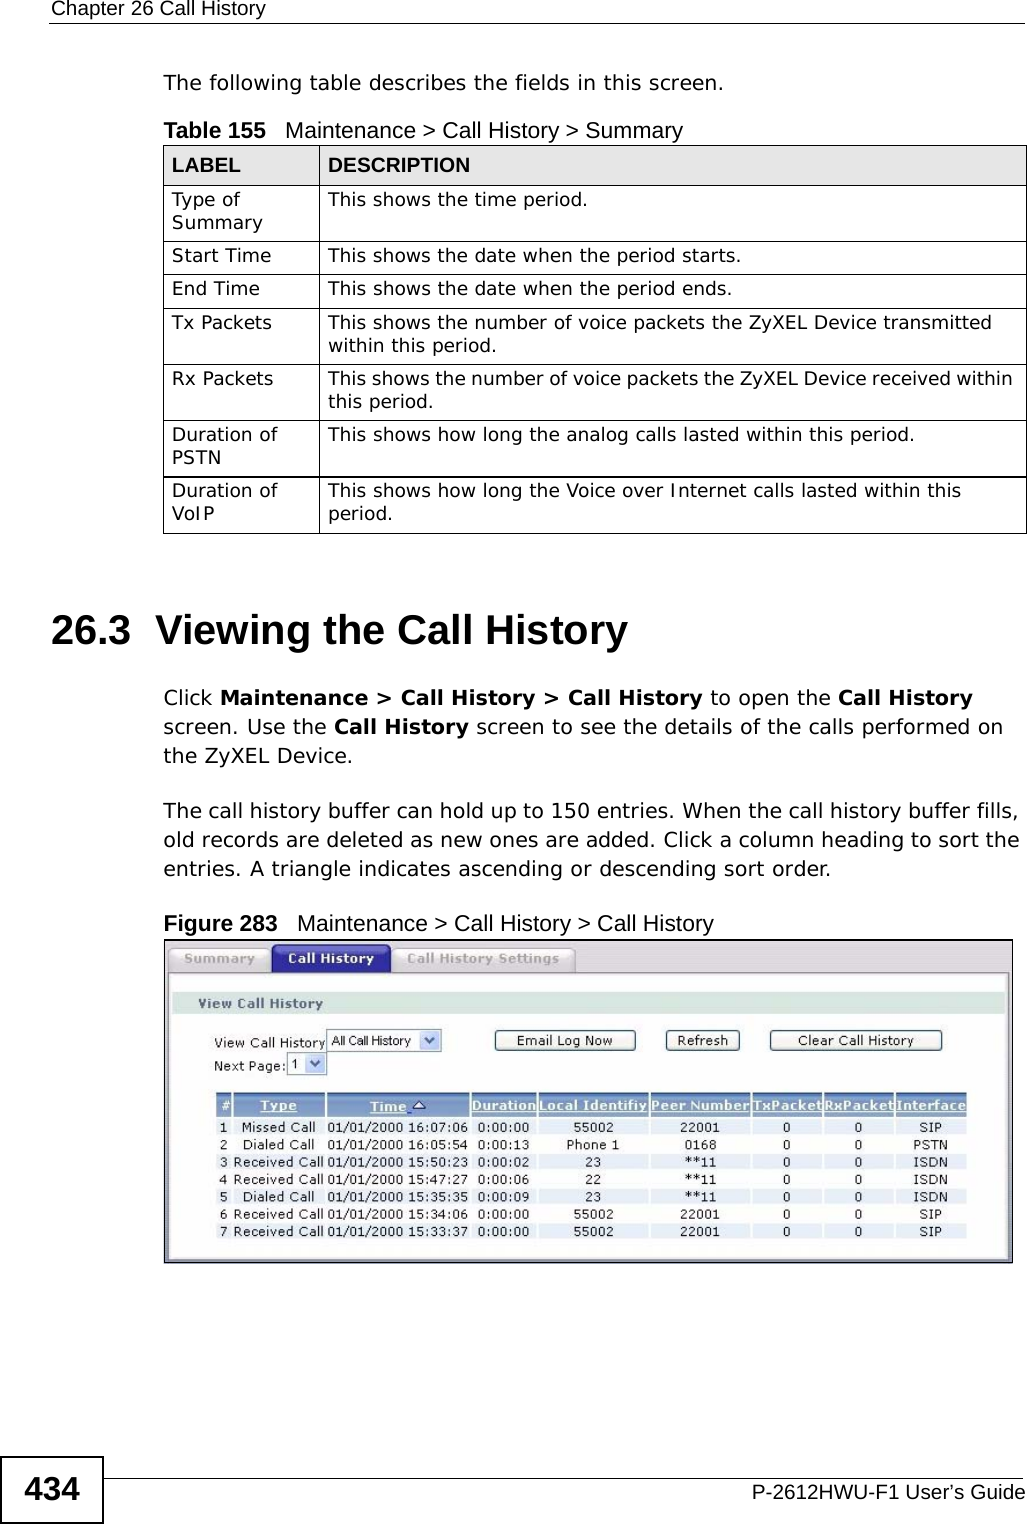 Chapter 26 Call HistoryP-2612HWU-F1 User’s Guide434The following table describes the fields in this screen.   26.3  Viewing the Call History Click Maintenance &gt; Call History &gt; Call History to open the Call History screen. Use the Call History screen to see the details of the calls performed on the ZyXEL Device. The call history buffer can hold up to 150 entries. When the call history buffer fills, old records are deleted as new ones are added. Click a column heading to sort the entries. A triangle indicates ascending or descending sort order. Figure 283   Maintenance &gt; Call History &gt; Call History Table 155   Maintenance &gt; Call History &gt; SummaryLABEL DESCRIPTIONType of Summary This shows the time period.Start Time This shows the date when the period starts.End Time  This shows the date when the period ends.Tx Packets This shows the number of voice packets the ZyXEL Device transmitted within this period.Rx Packets This shows the number of voice packets the ZyXEL Device received within this period.Duration of PSTN This shows how long the analog calls lasted within this period.Duration of VoIP This shows how long the Voice over Internet calls lasted within this period.